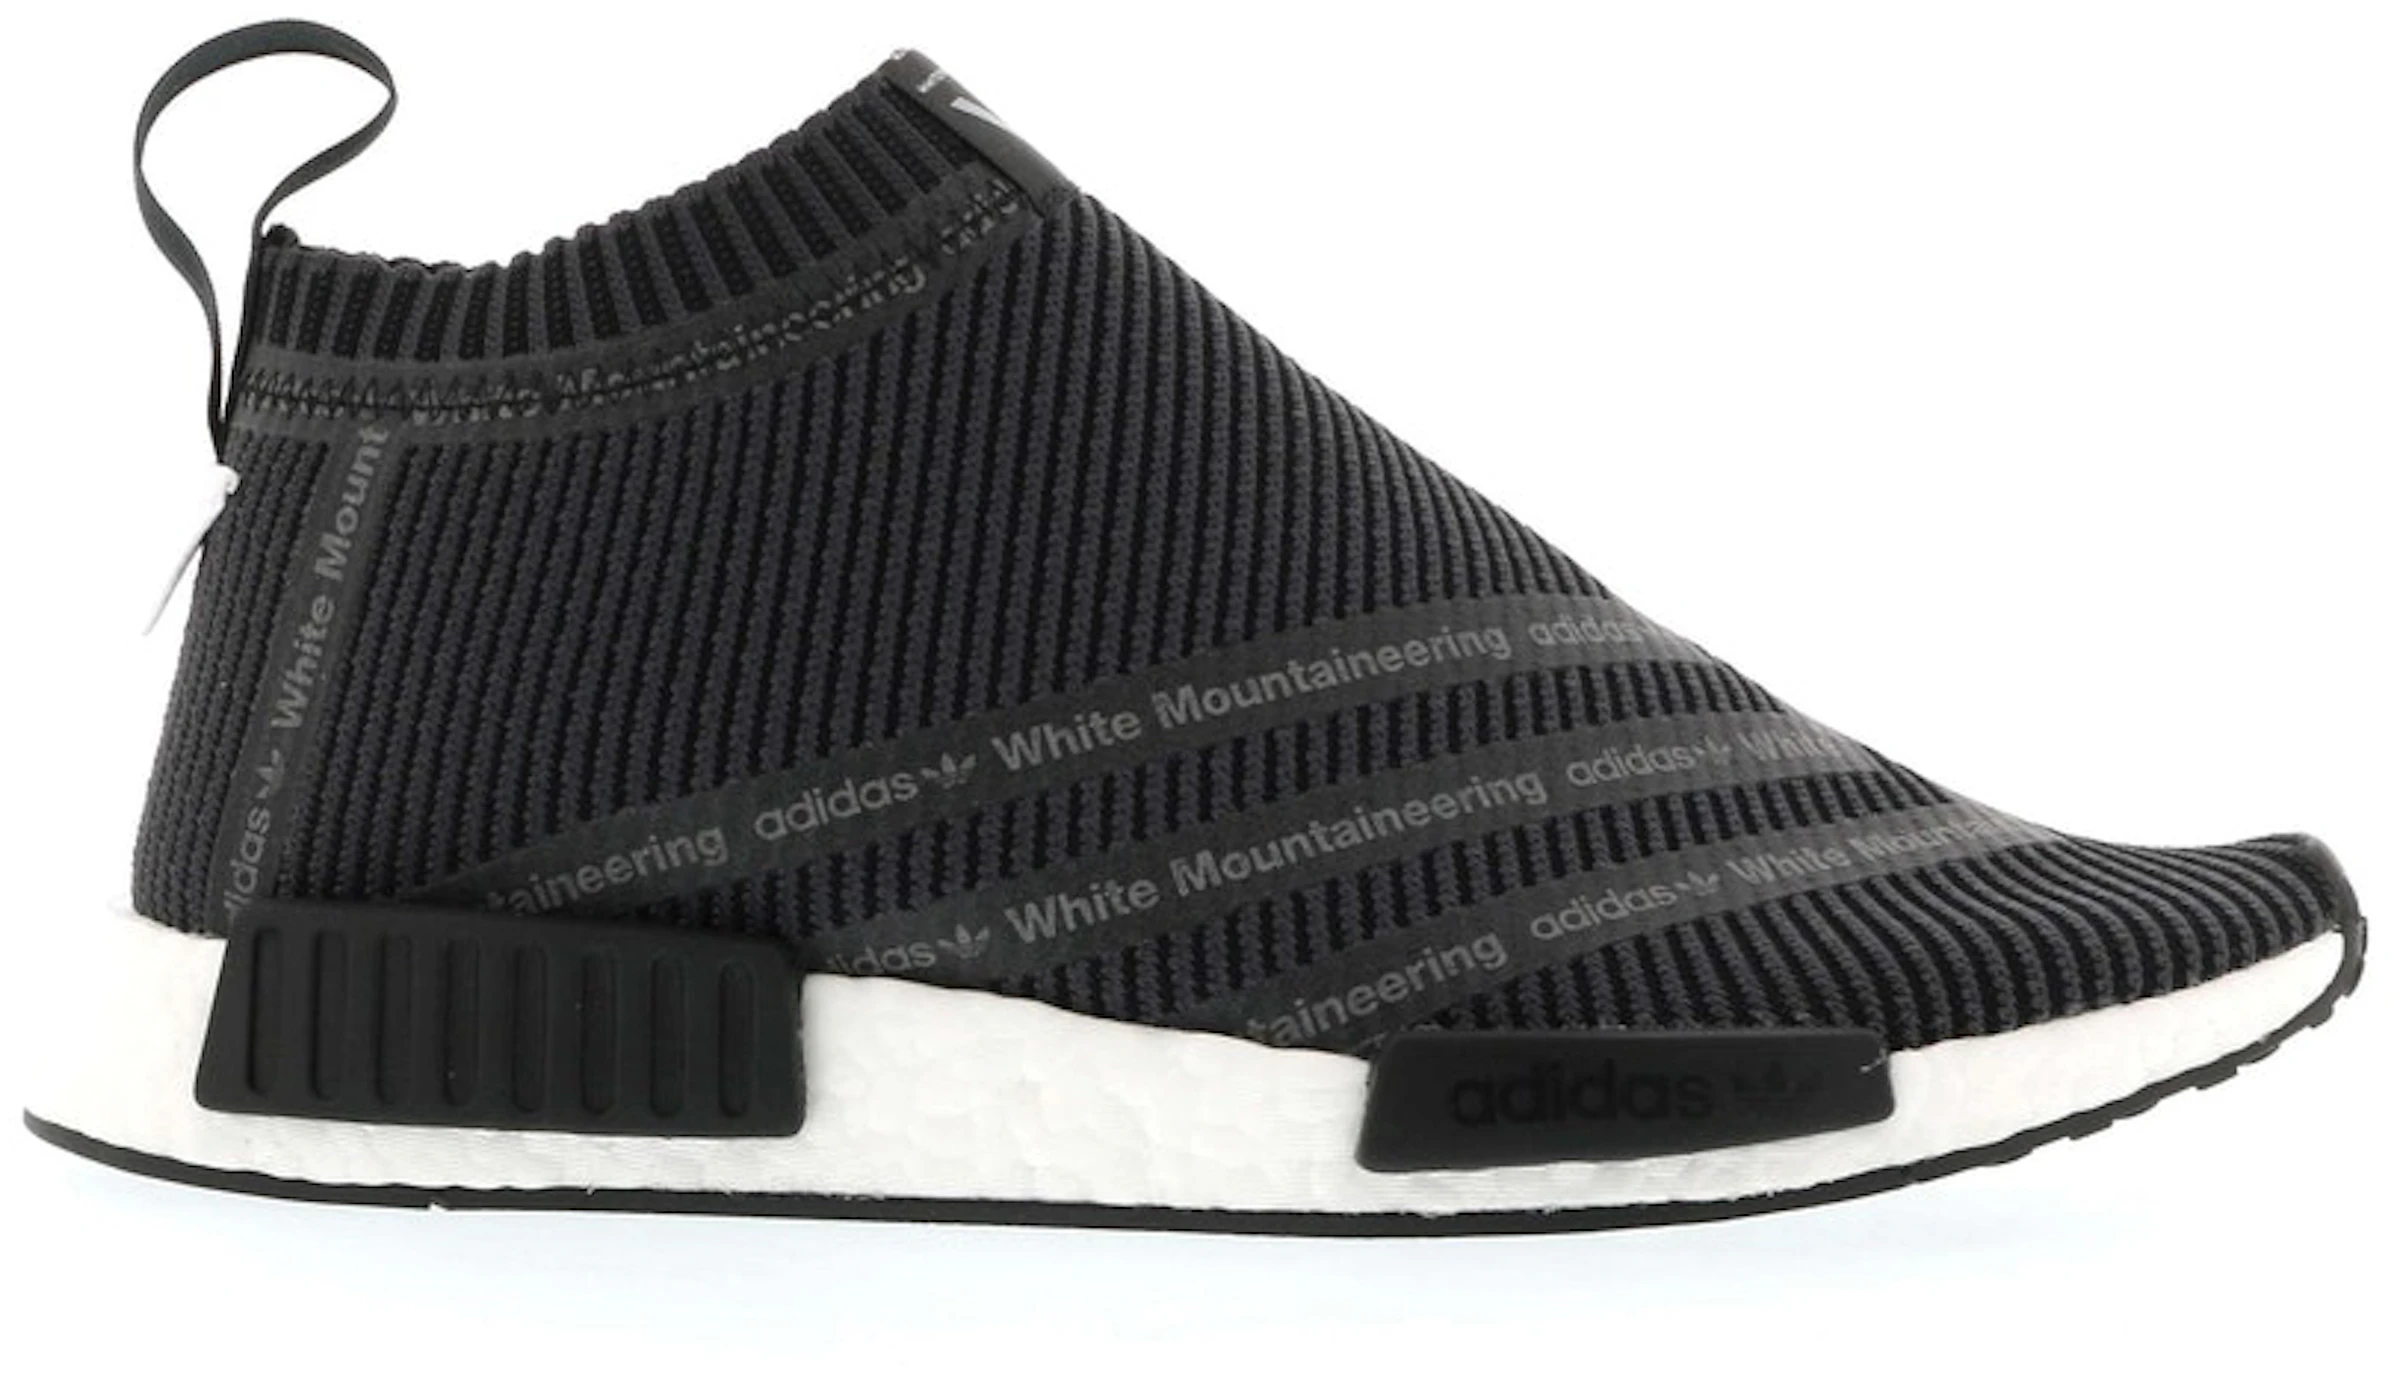 adidas NMD City Sock White Mountaineering - S80529 ES